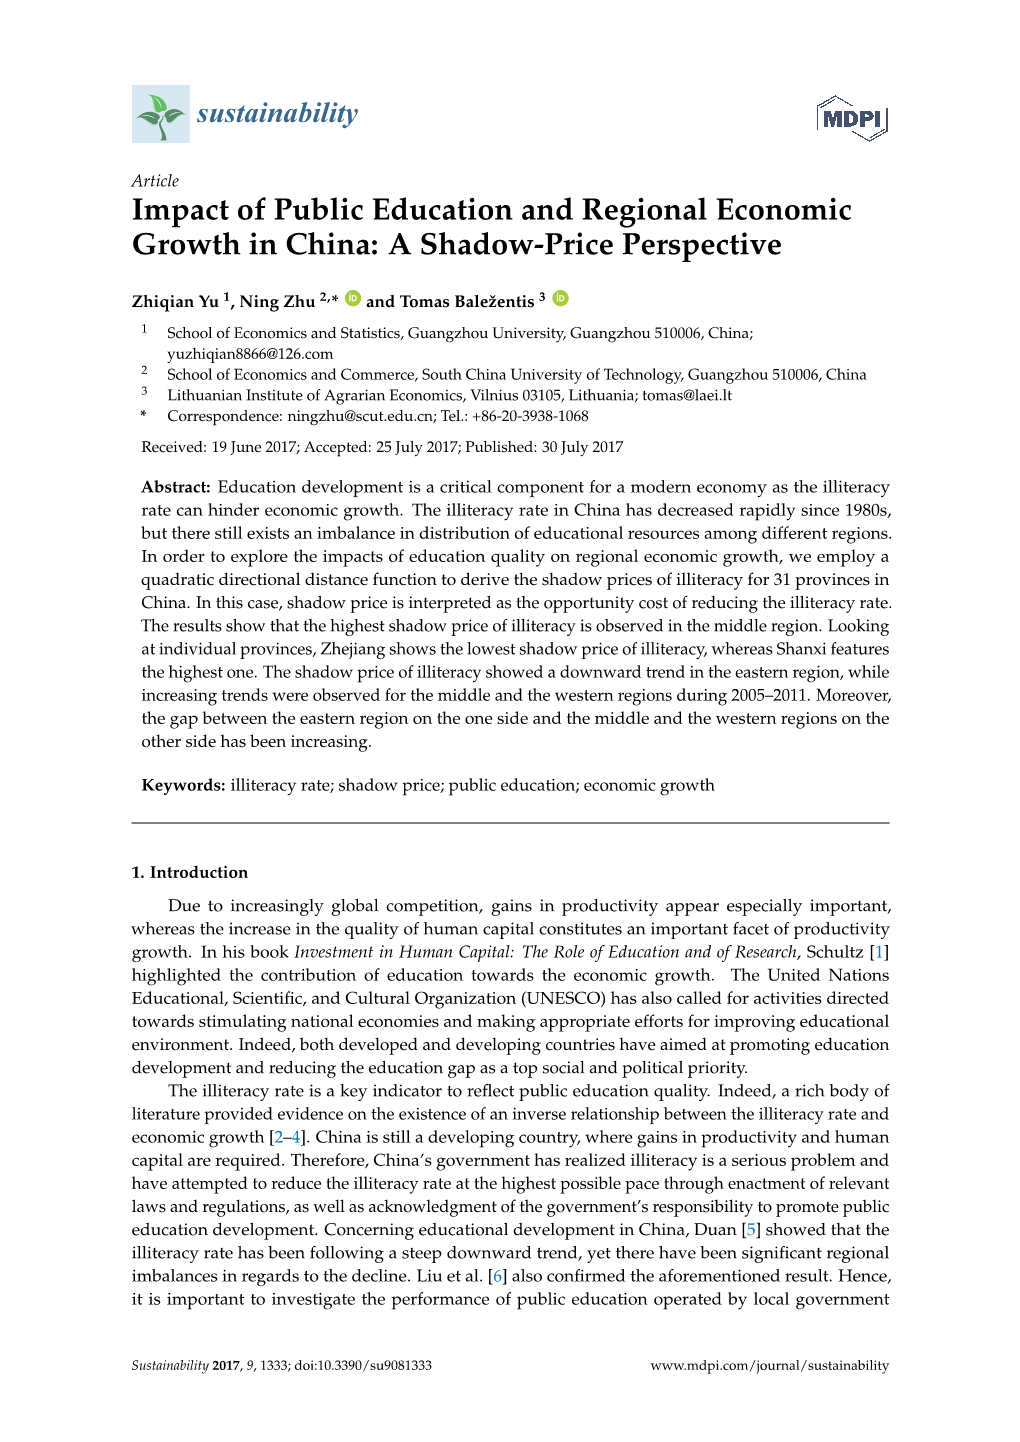 Impact of Public Education and Regional Economic Growth in China: a Shadow-Price Perspective